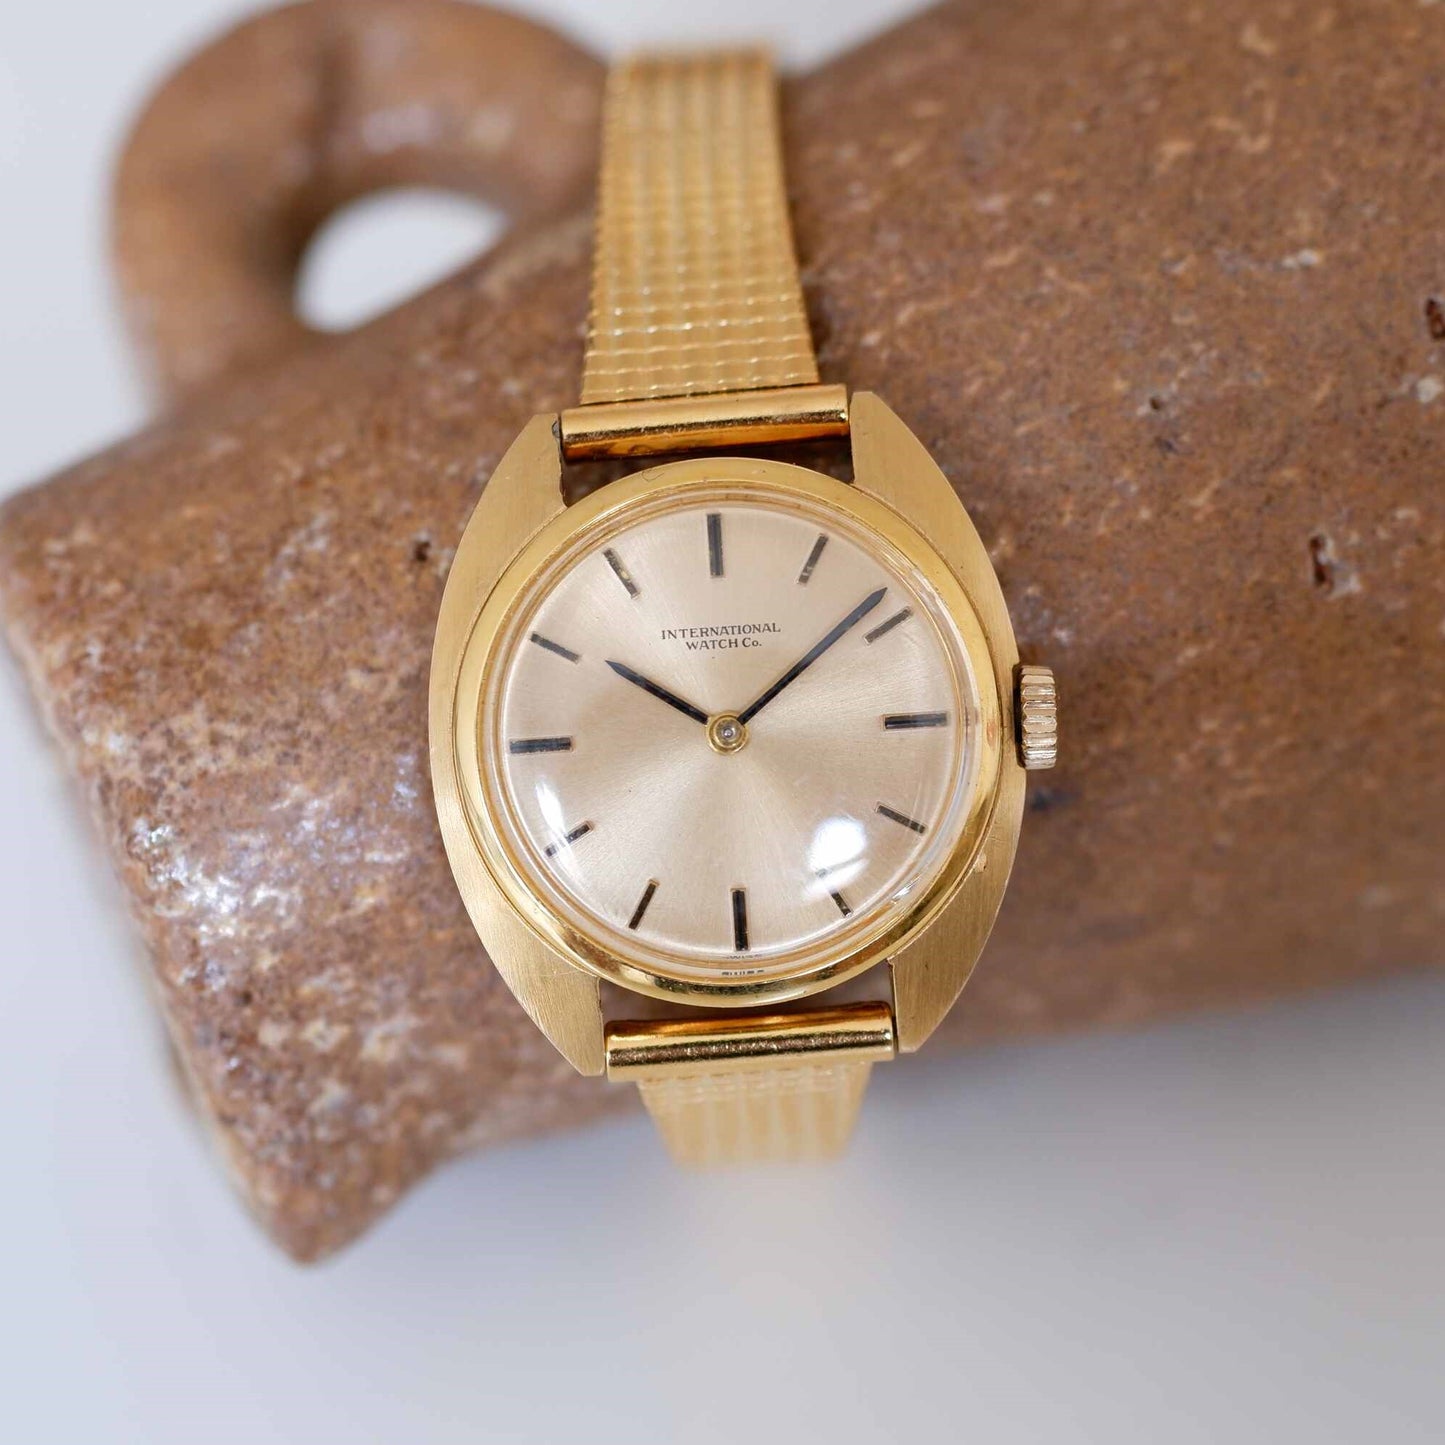 IWC Vintage Ladies Watch: 60s Golden Iconic, Gold Dial Mechanical | First Front Side